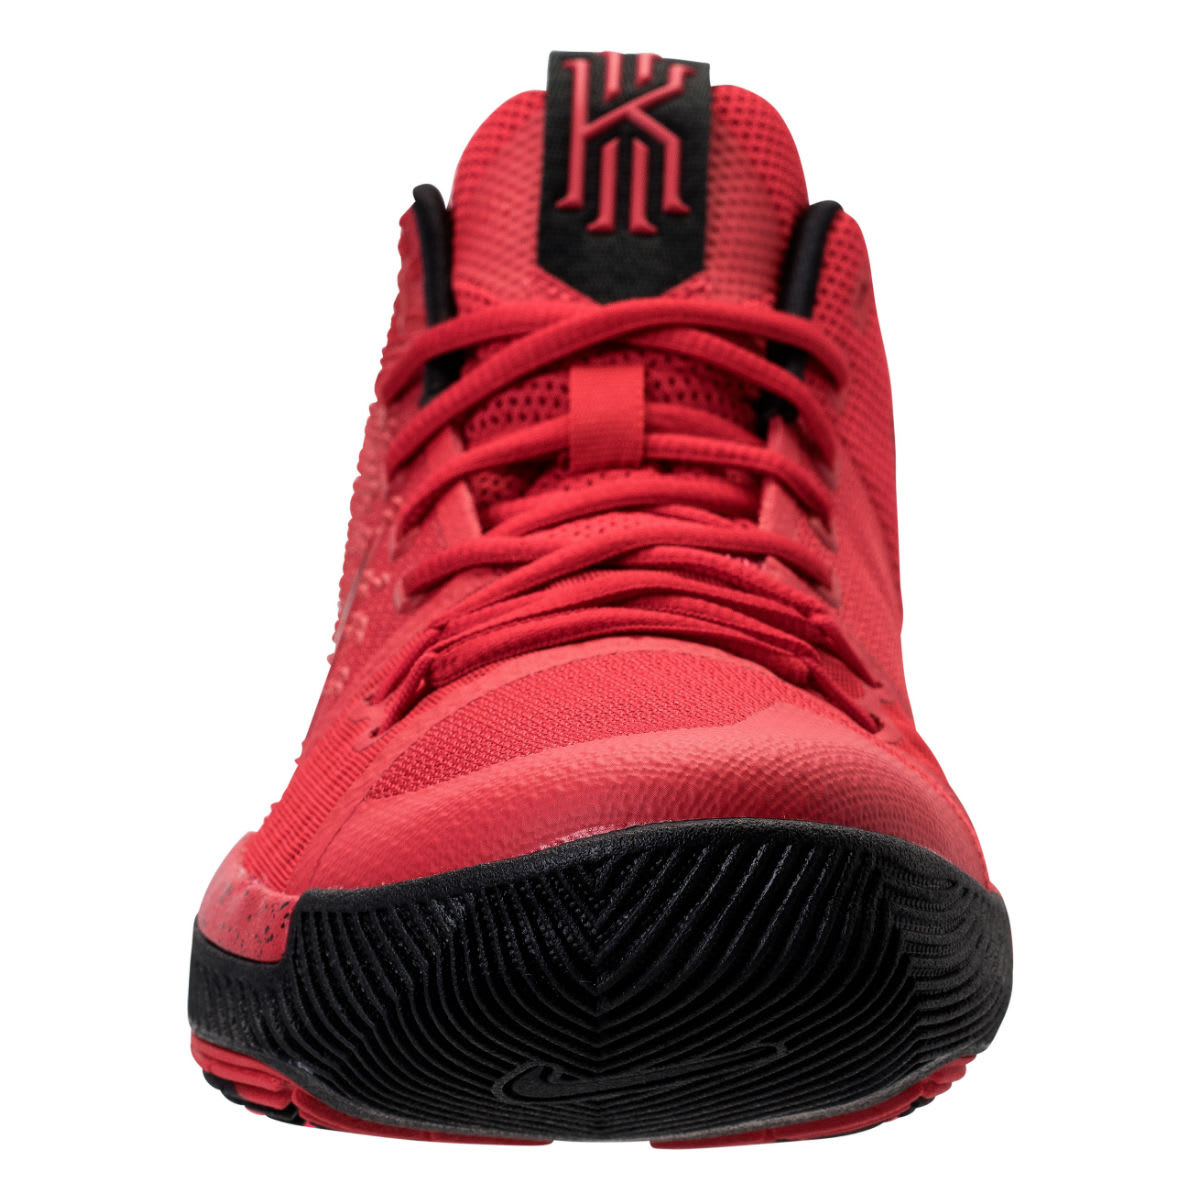 Nike Kyrie 3 Three-Point Contest University Red Release Date Front 852395-600